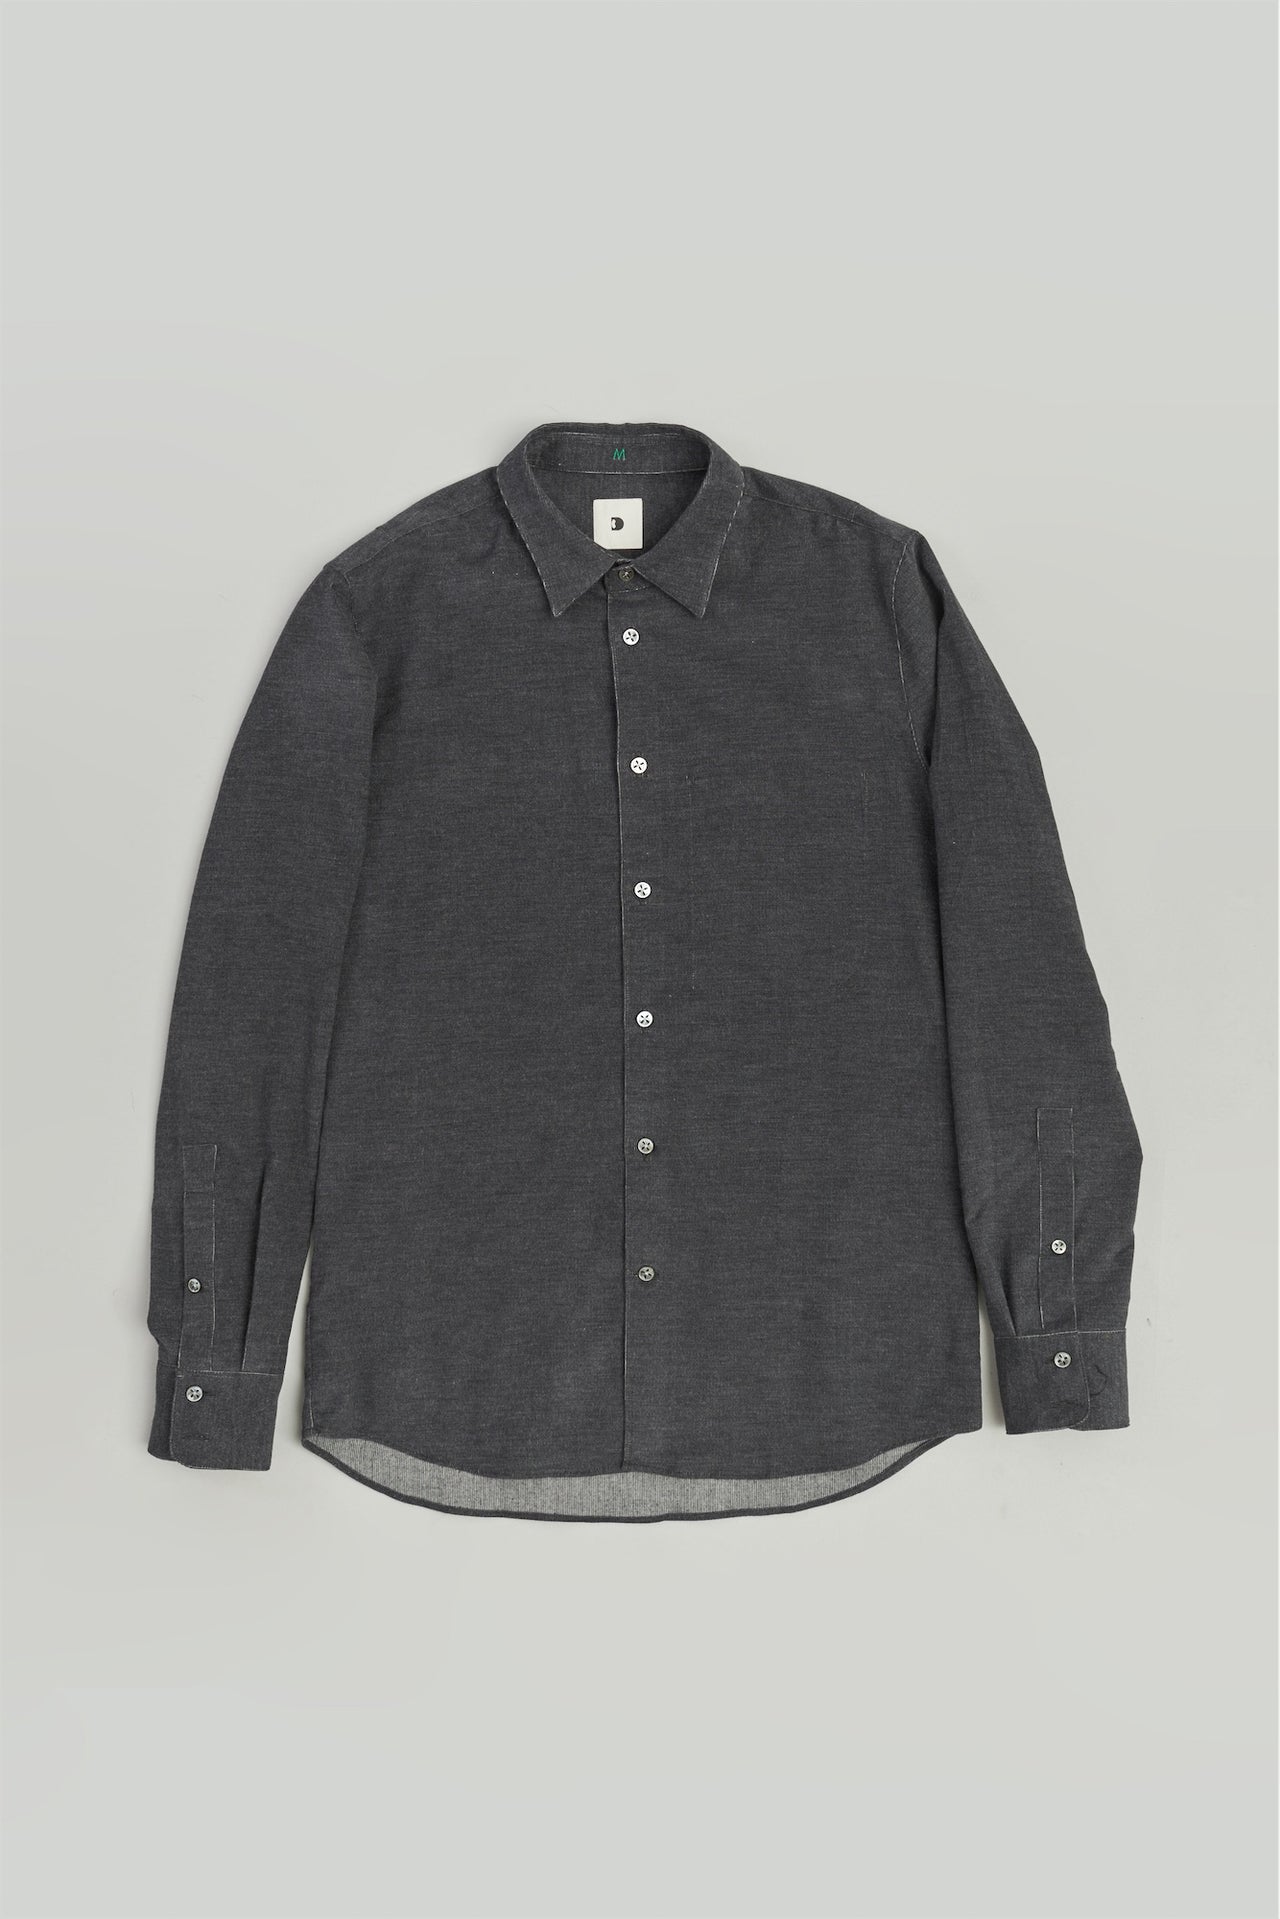 Feel Good Shirt in an Anthracite Grey Japanese Baby Corduroy Cotton